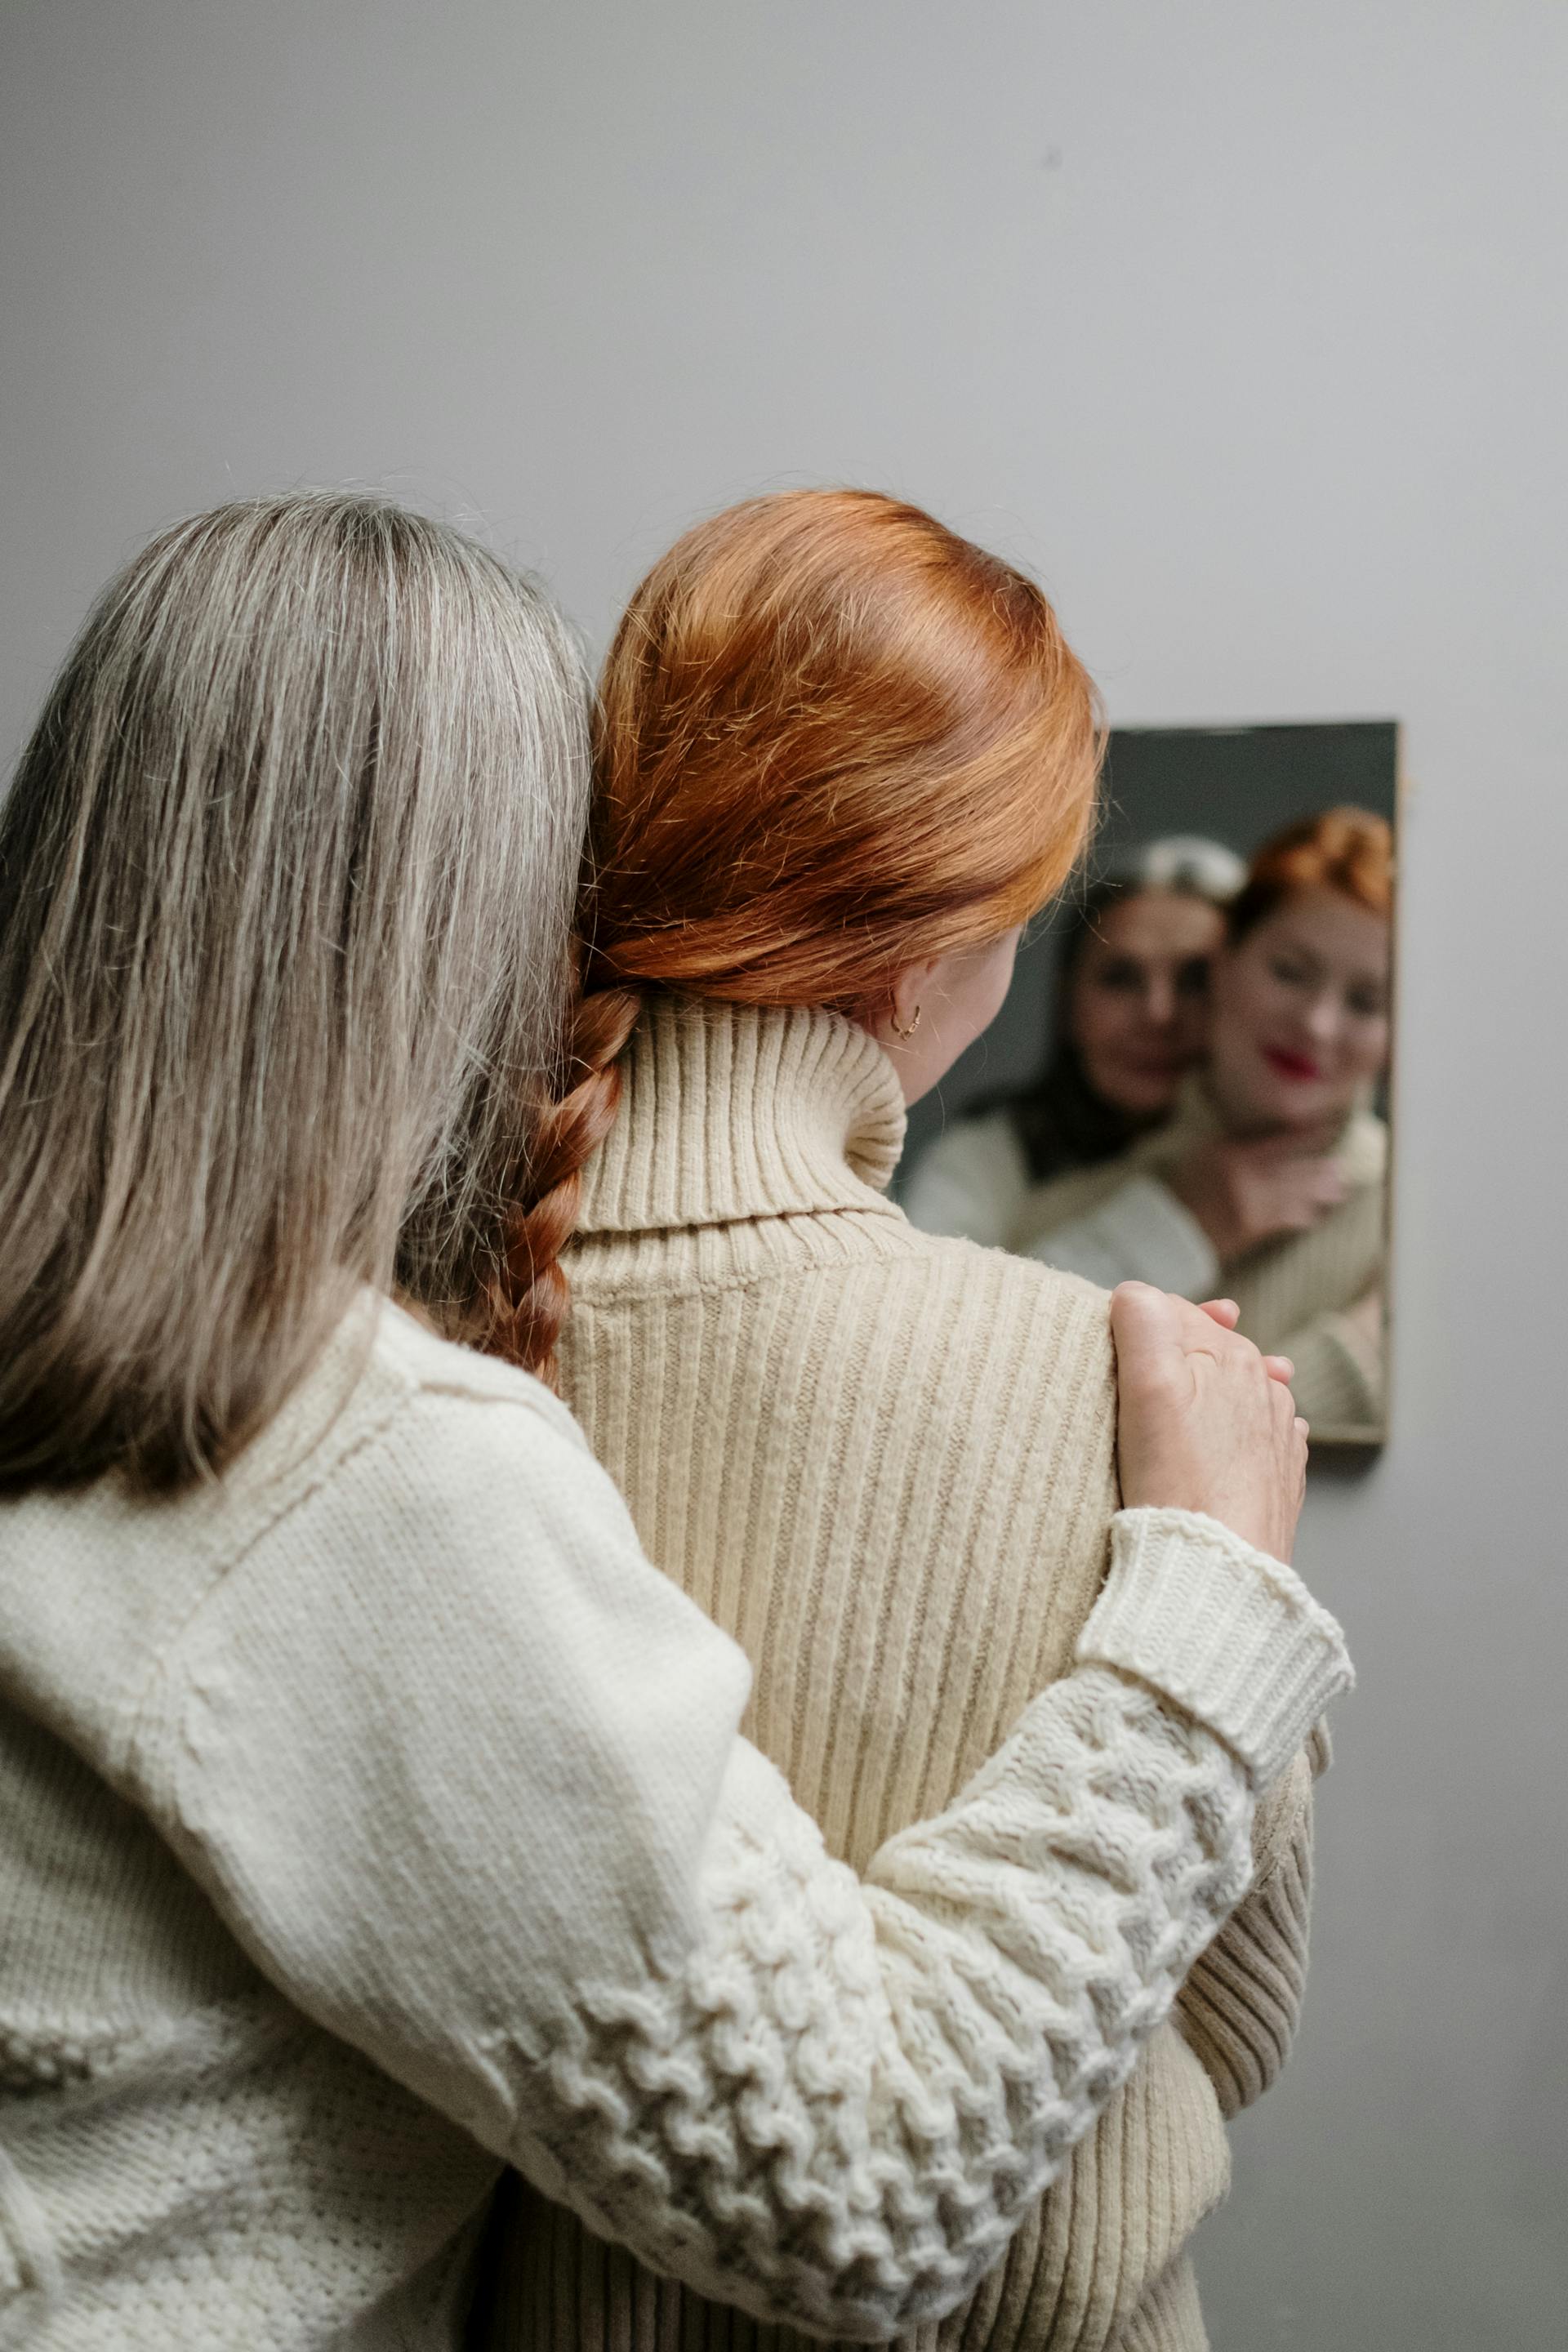 A mother and daughter hugging while looking at their reflections in the mirror | Source: Pexels